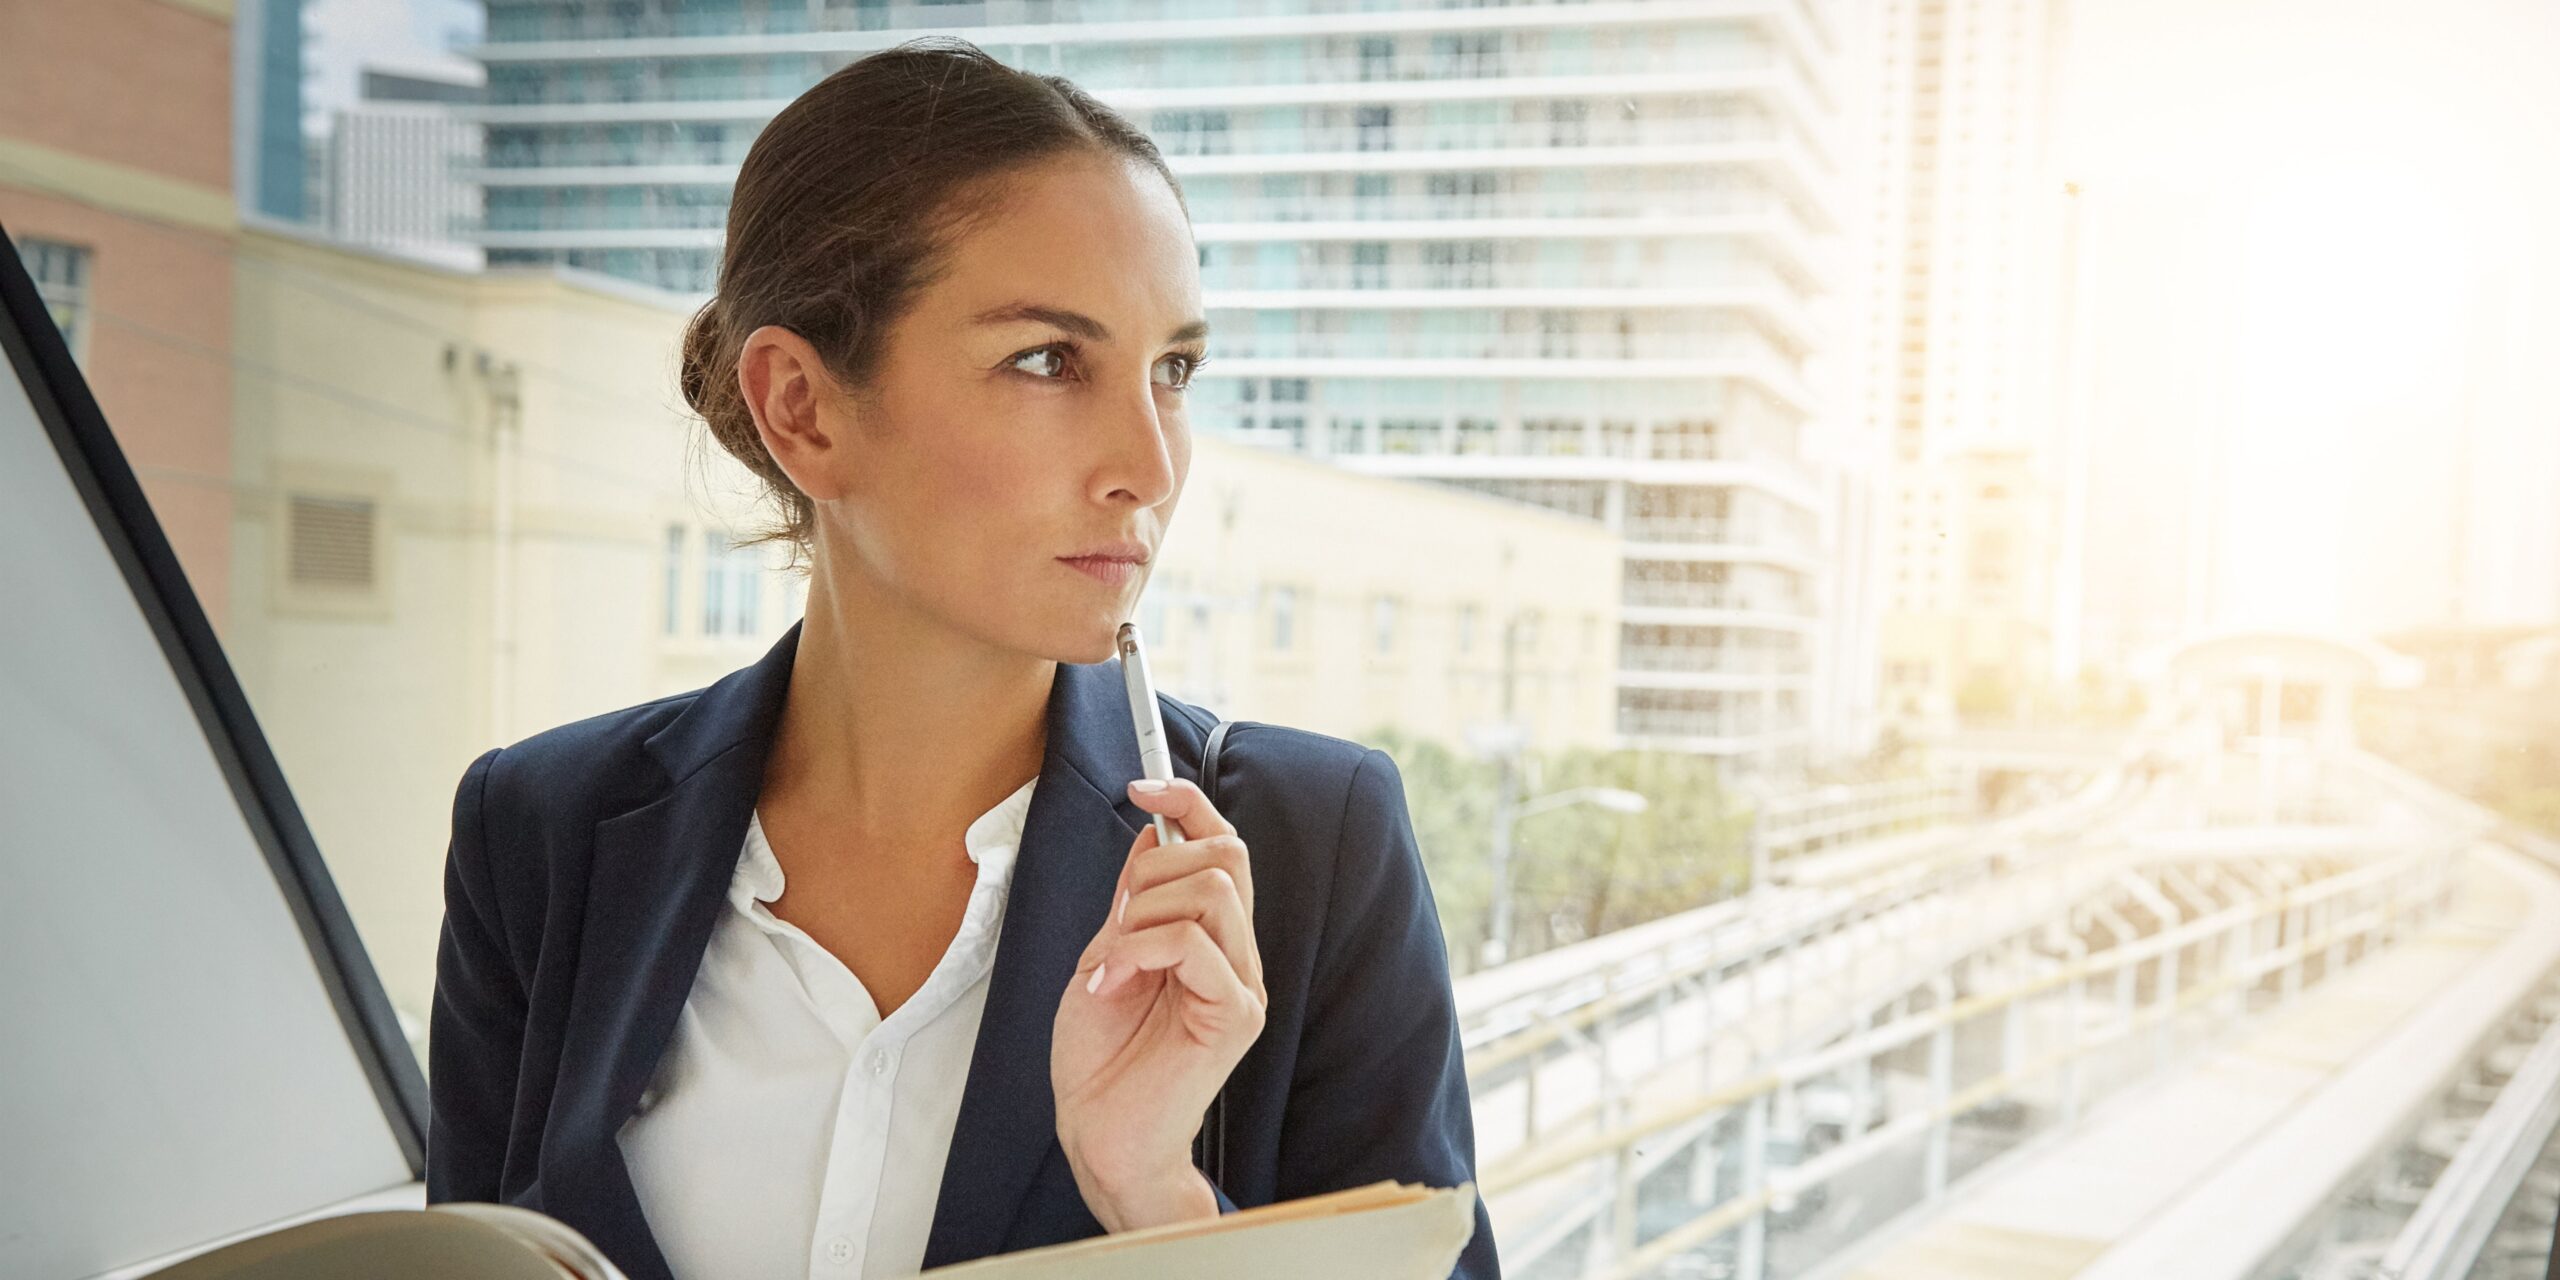 Hiring manager pondering - more considered hiring by top law firms